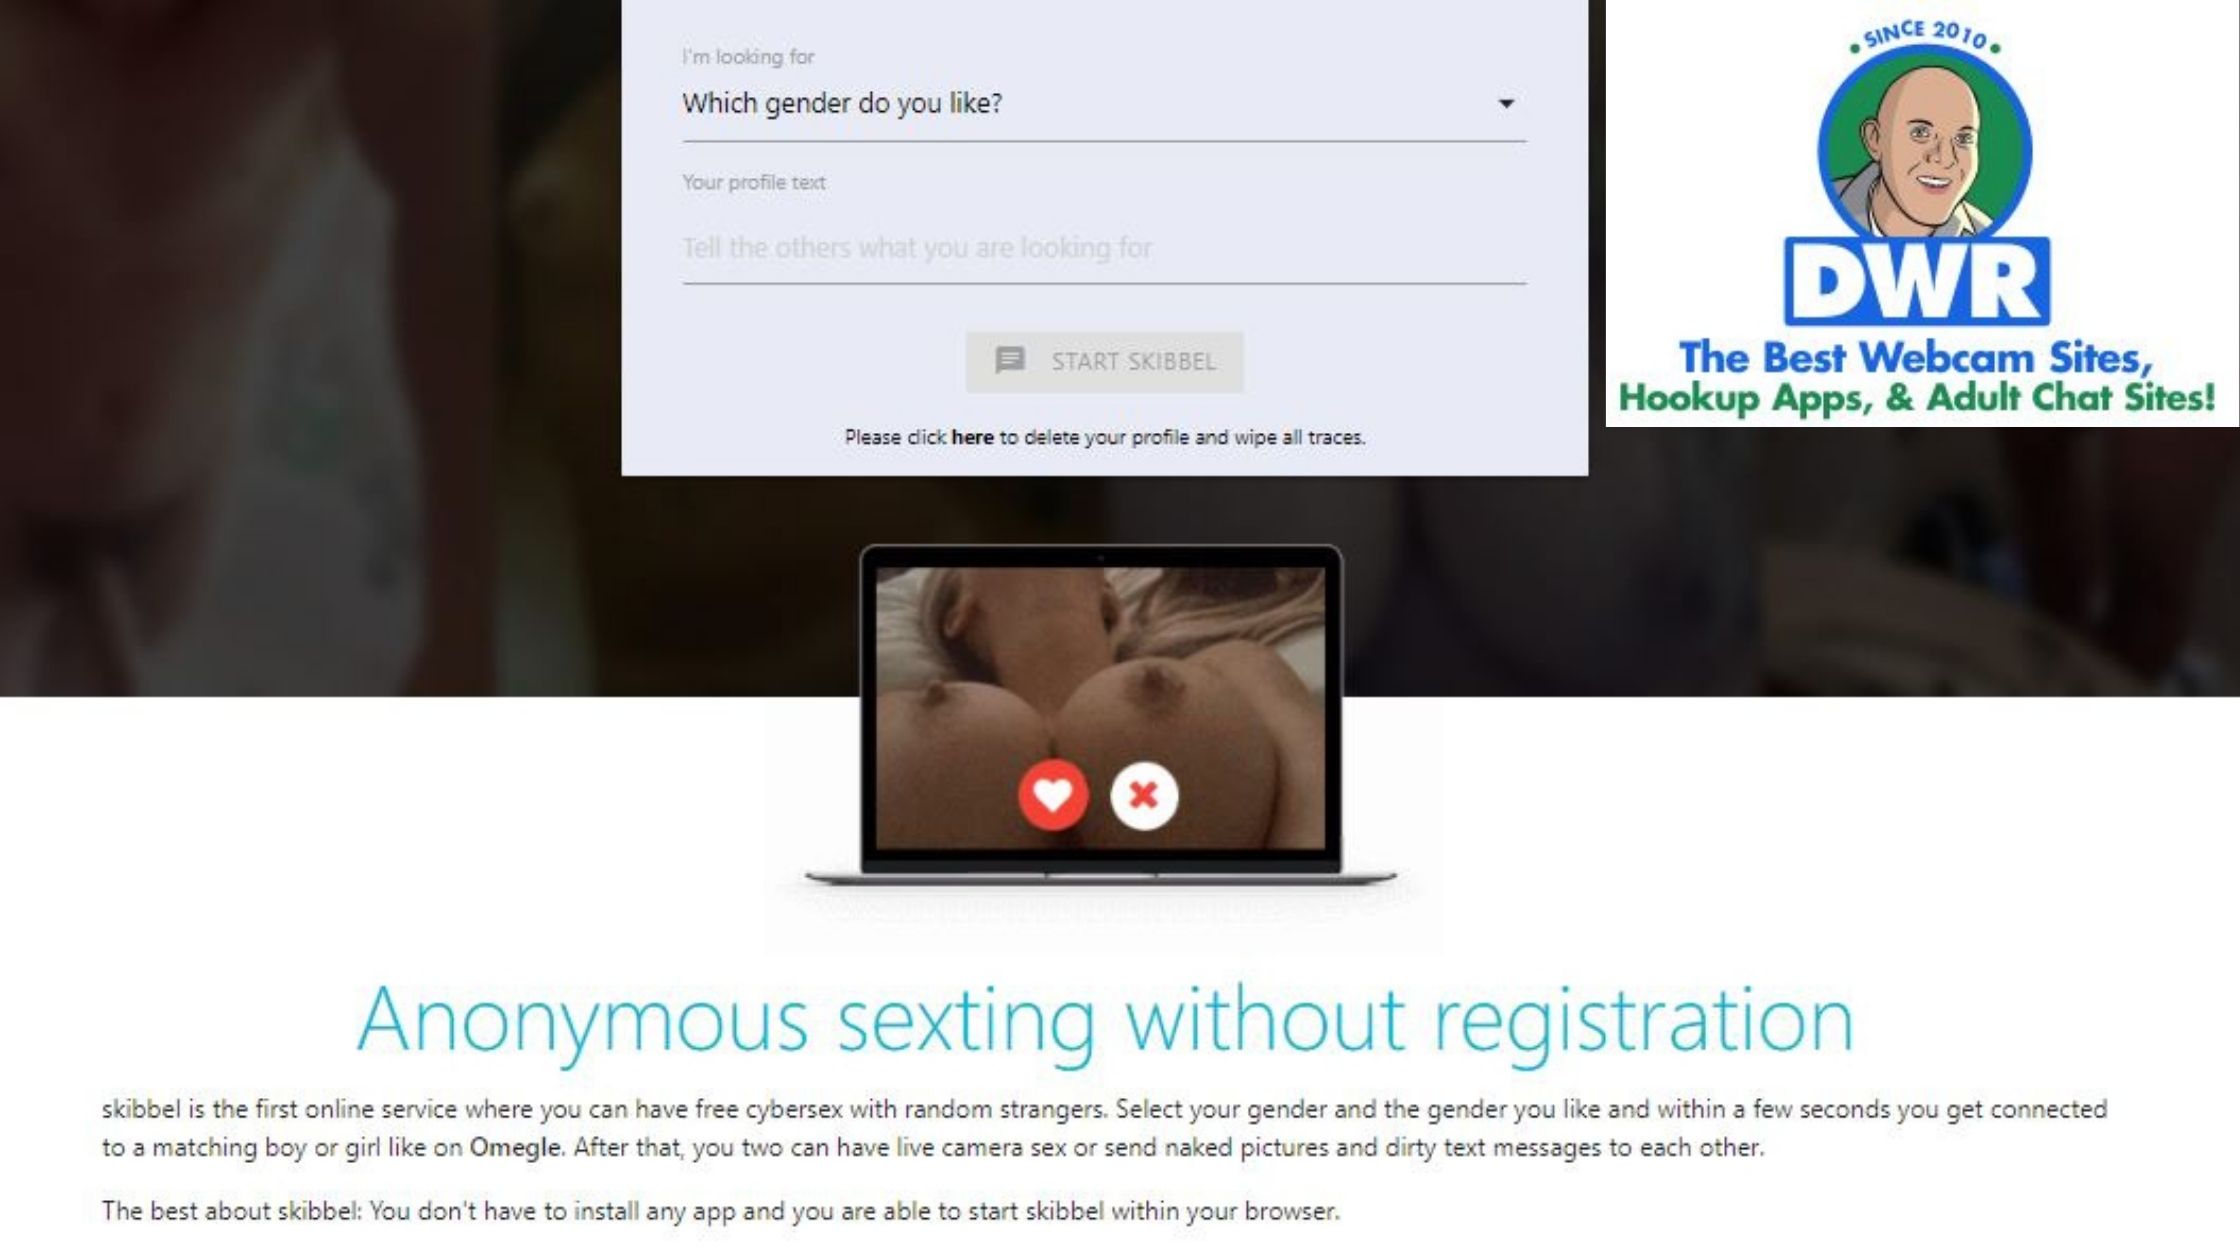 With free strangers sexting Anonymous chat